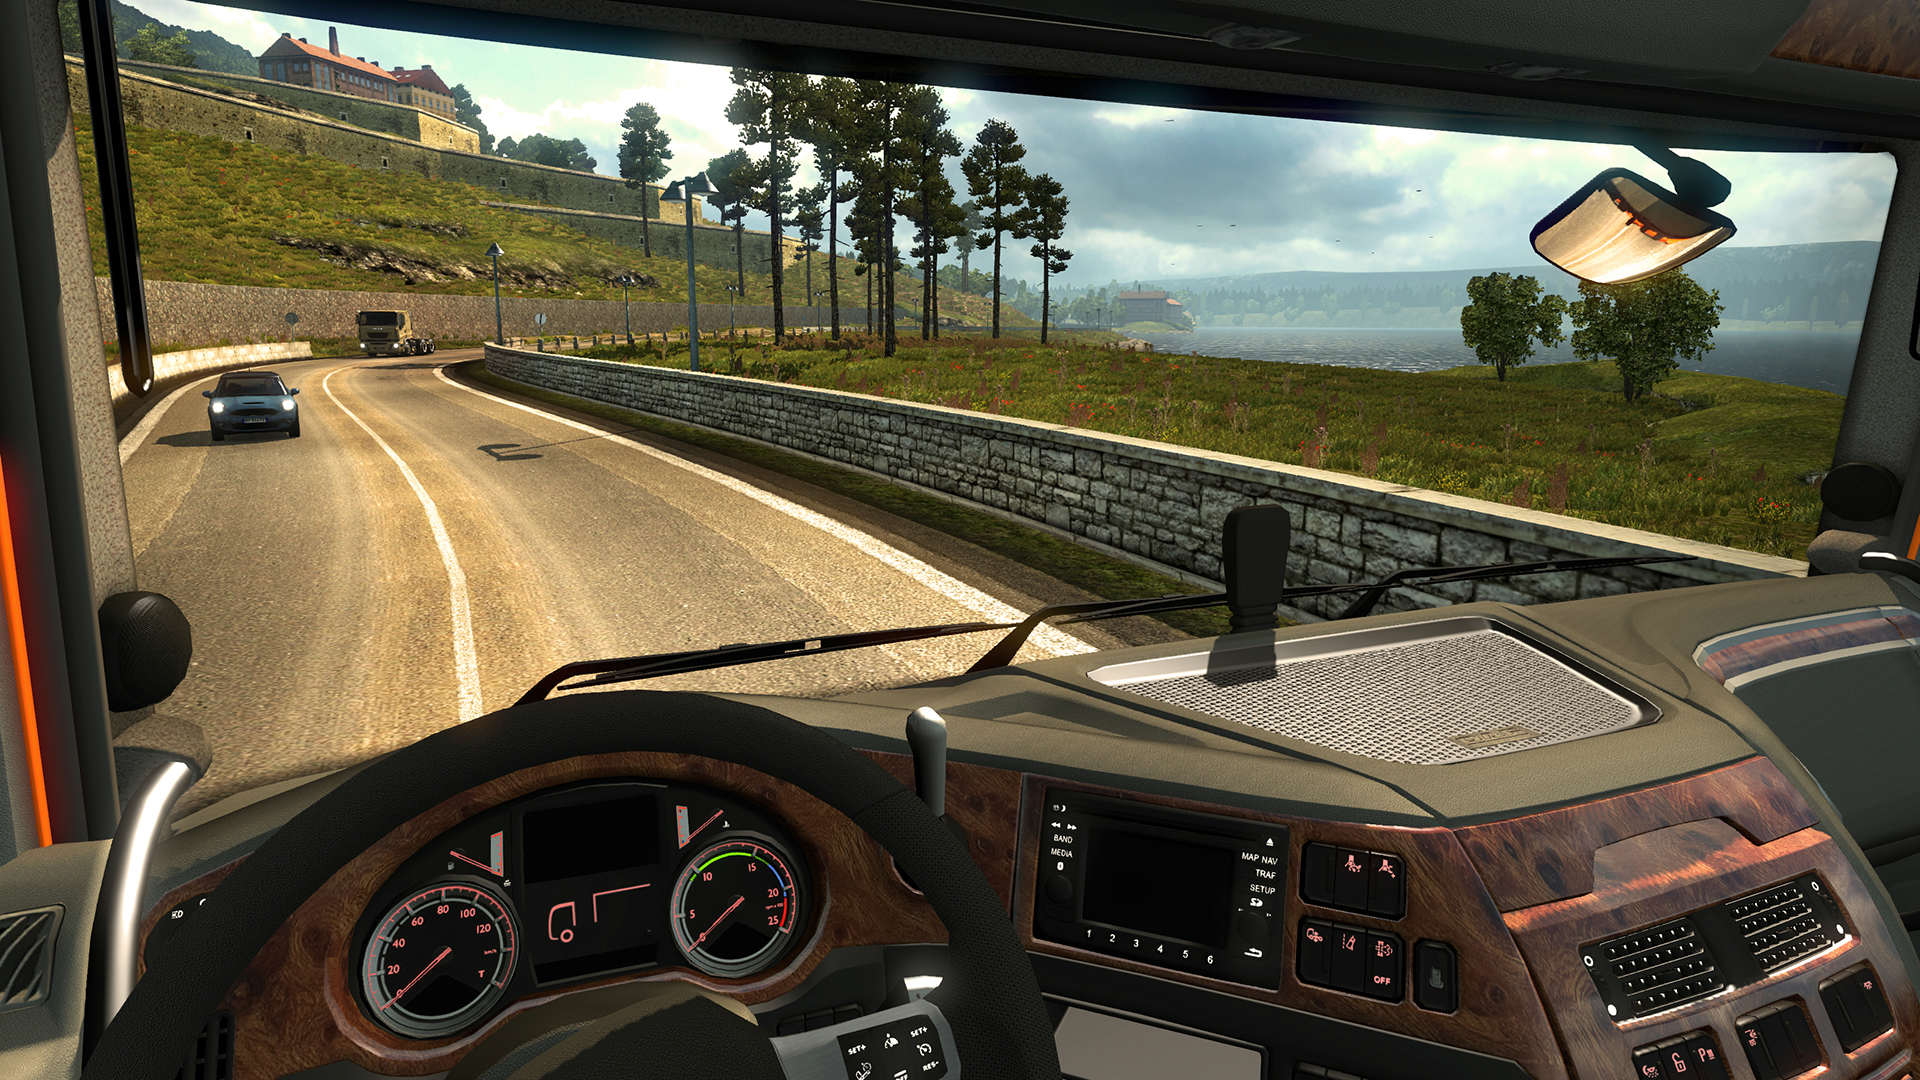 Vehicle Simulation Games PC: Most popular PC Games